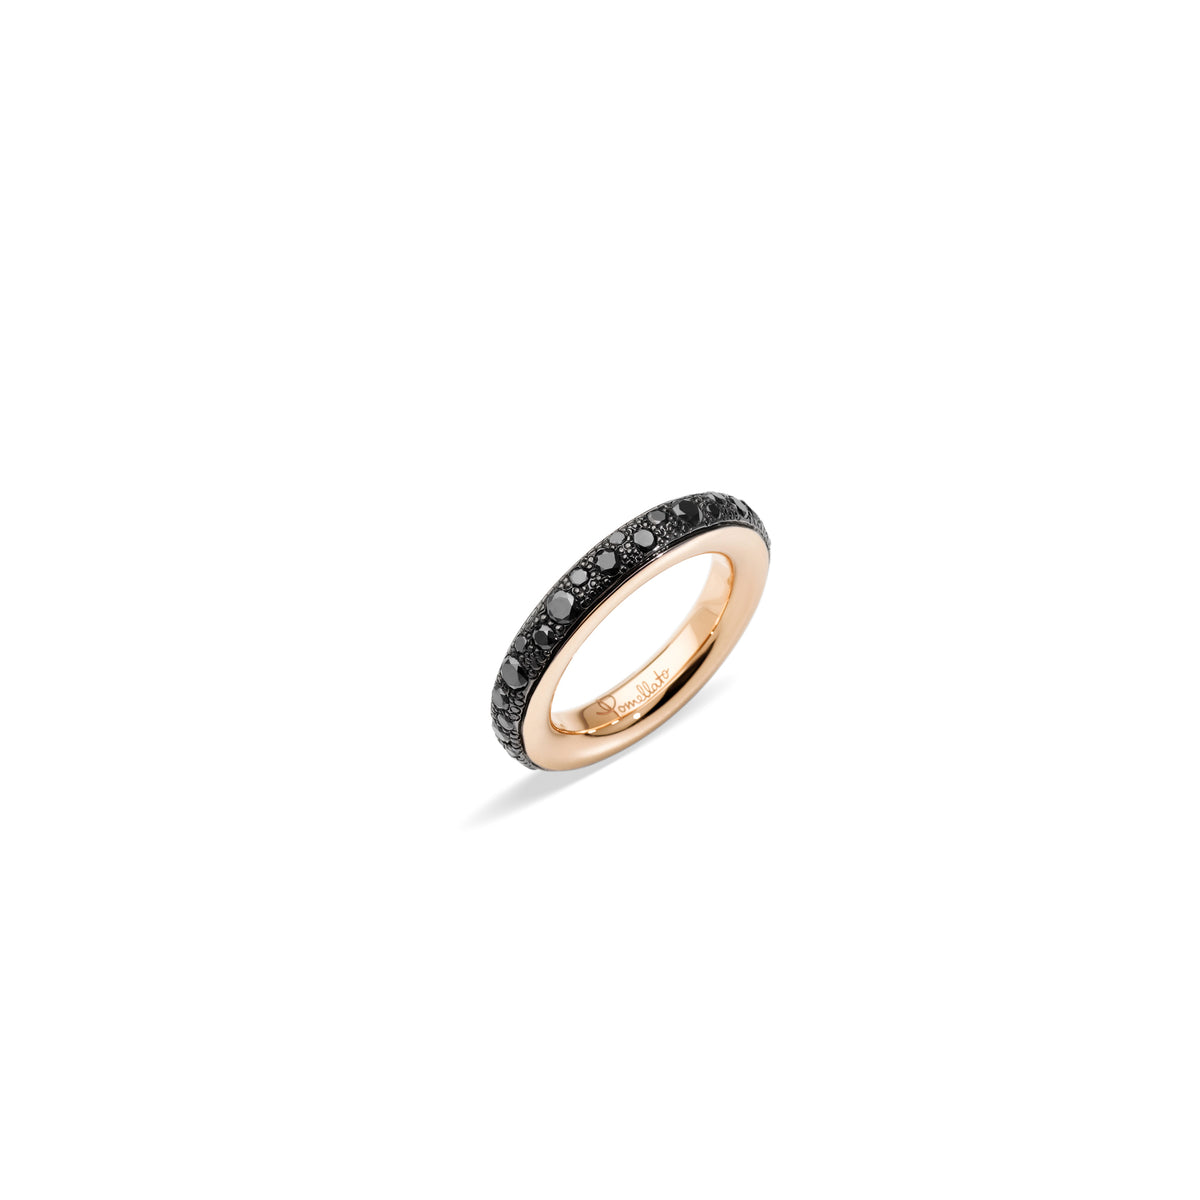 Iconica Ring in 18k Rose Gold with Pave Black Diamonds - Orsini Jewellers NZ